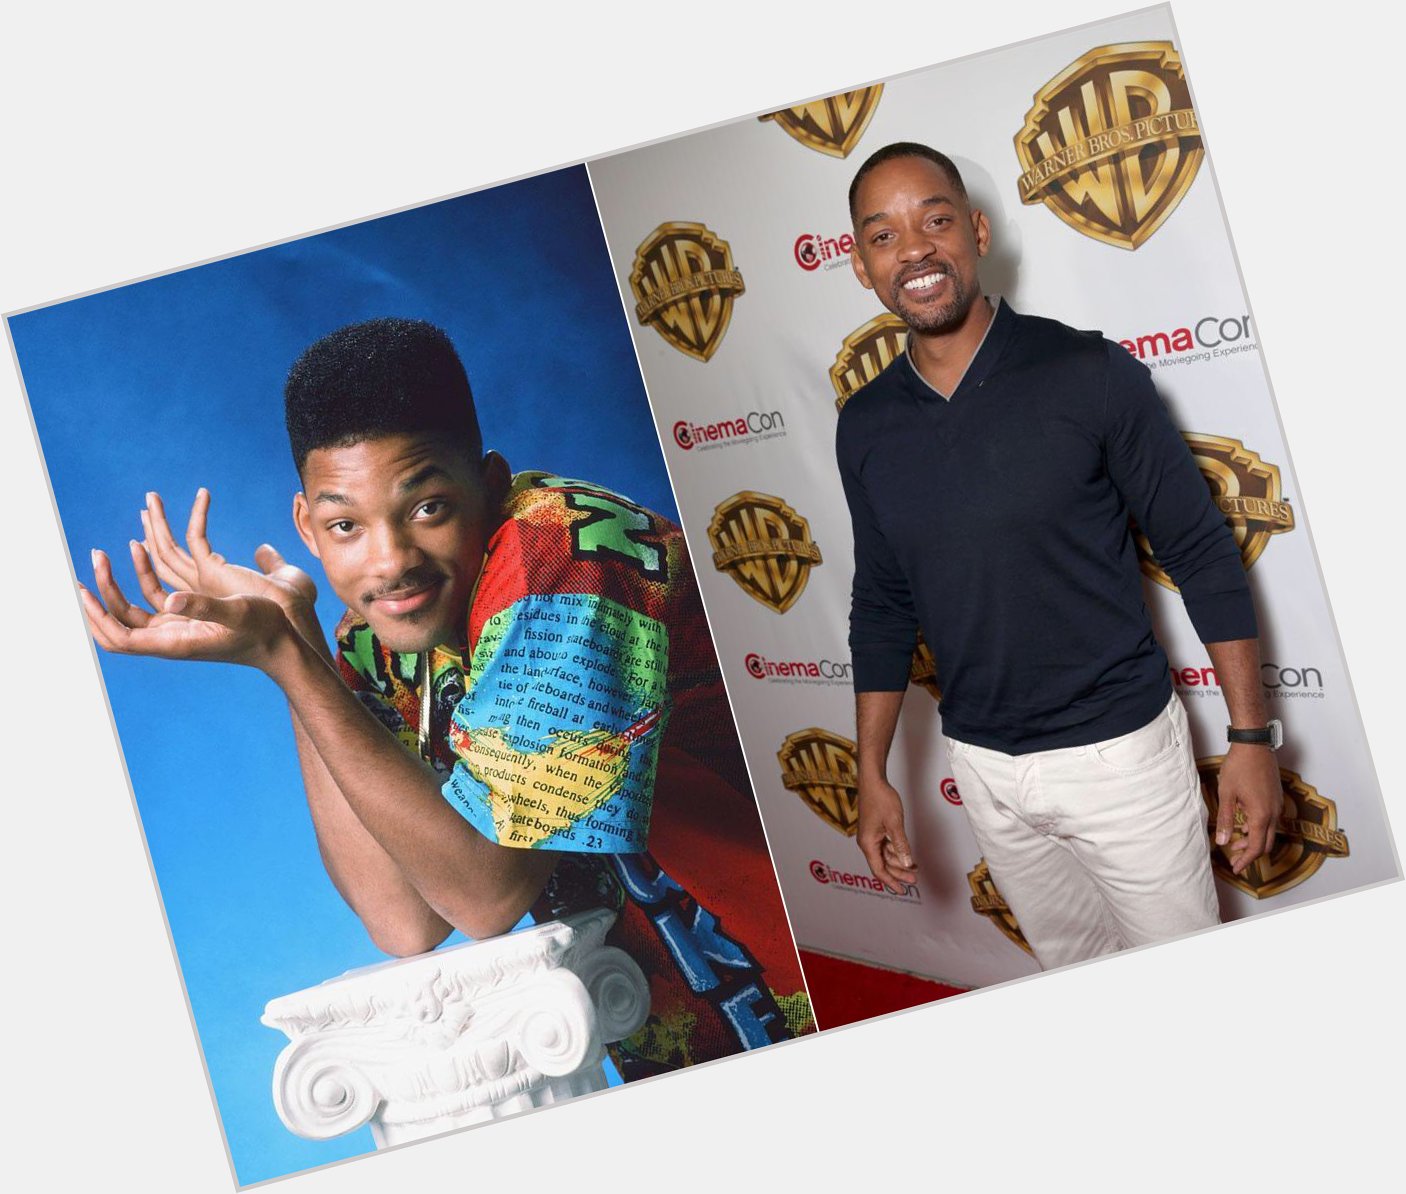 Happy 49th Birthday to Will Smith! The actor who played himself in The Fresh Prince of Bel-Air. 